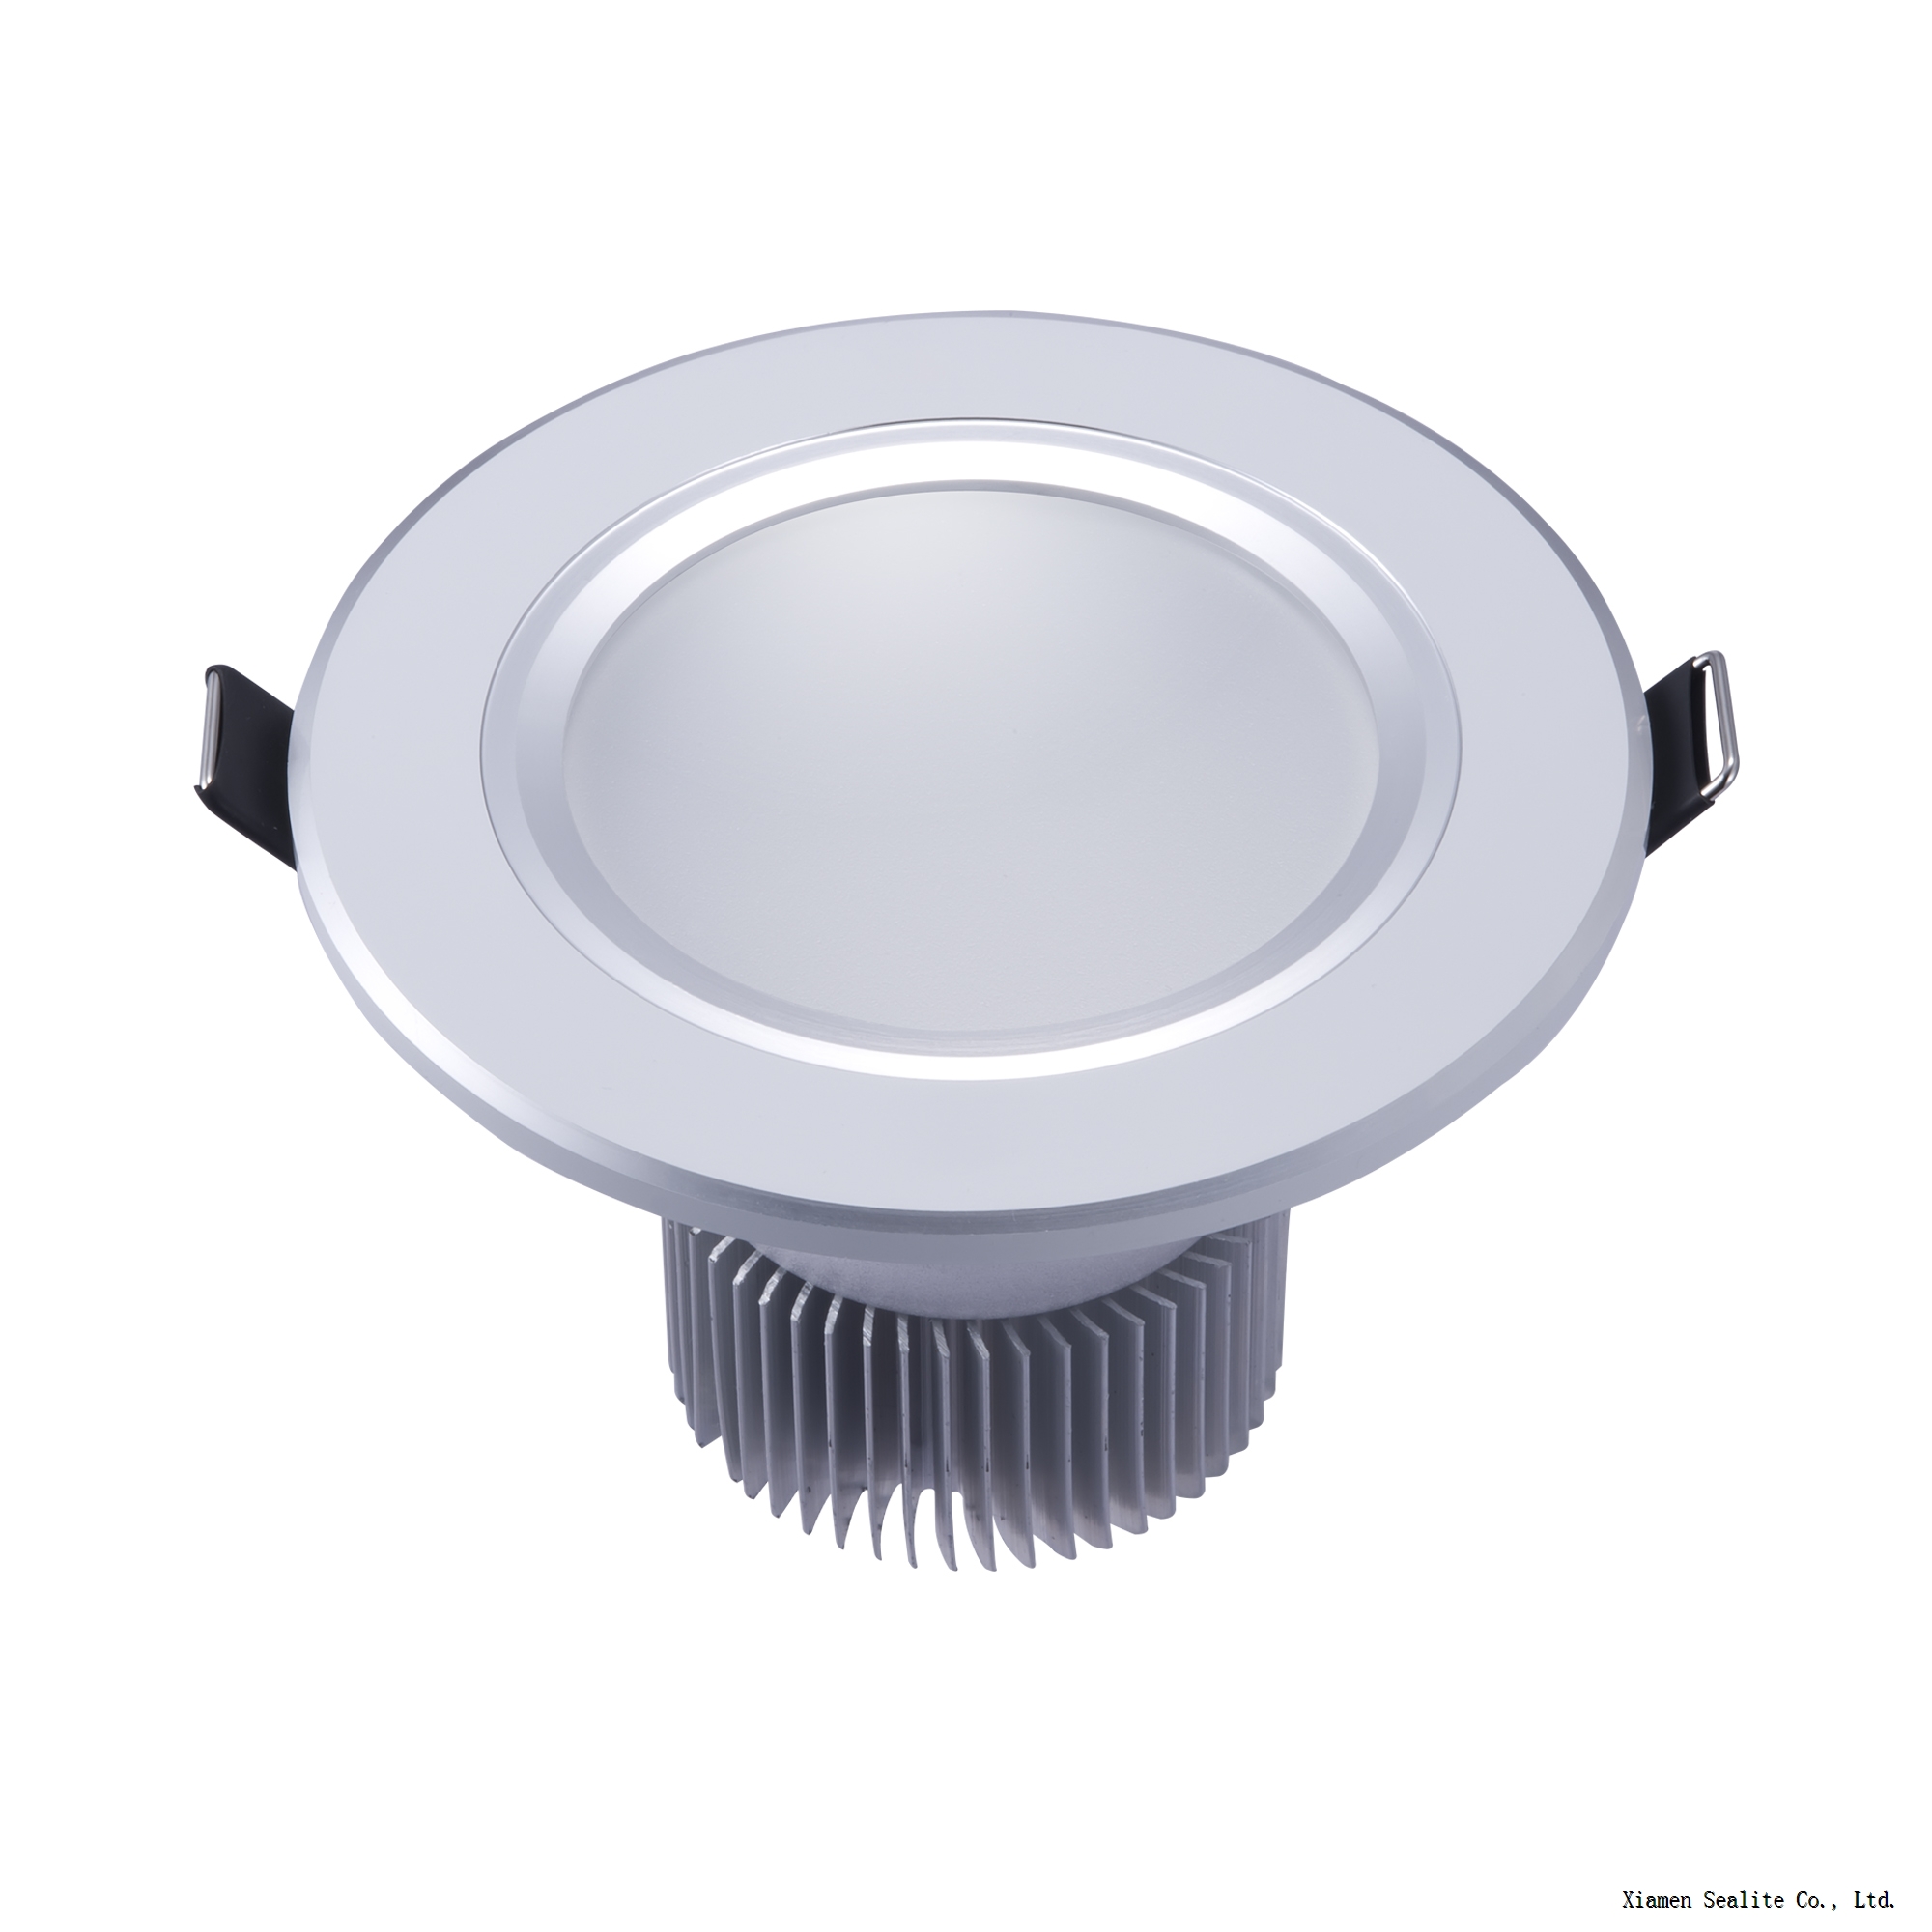 LED Down Light 3W with Beam Angle of 120 Degrees